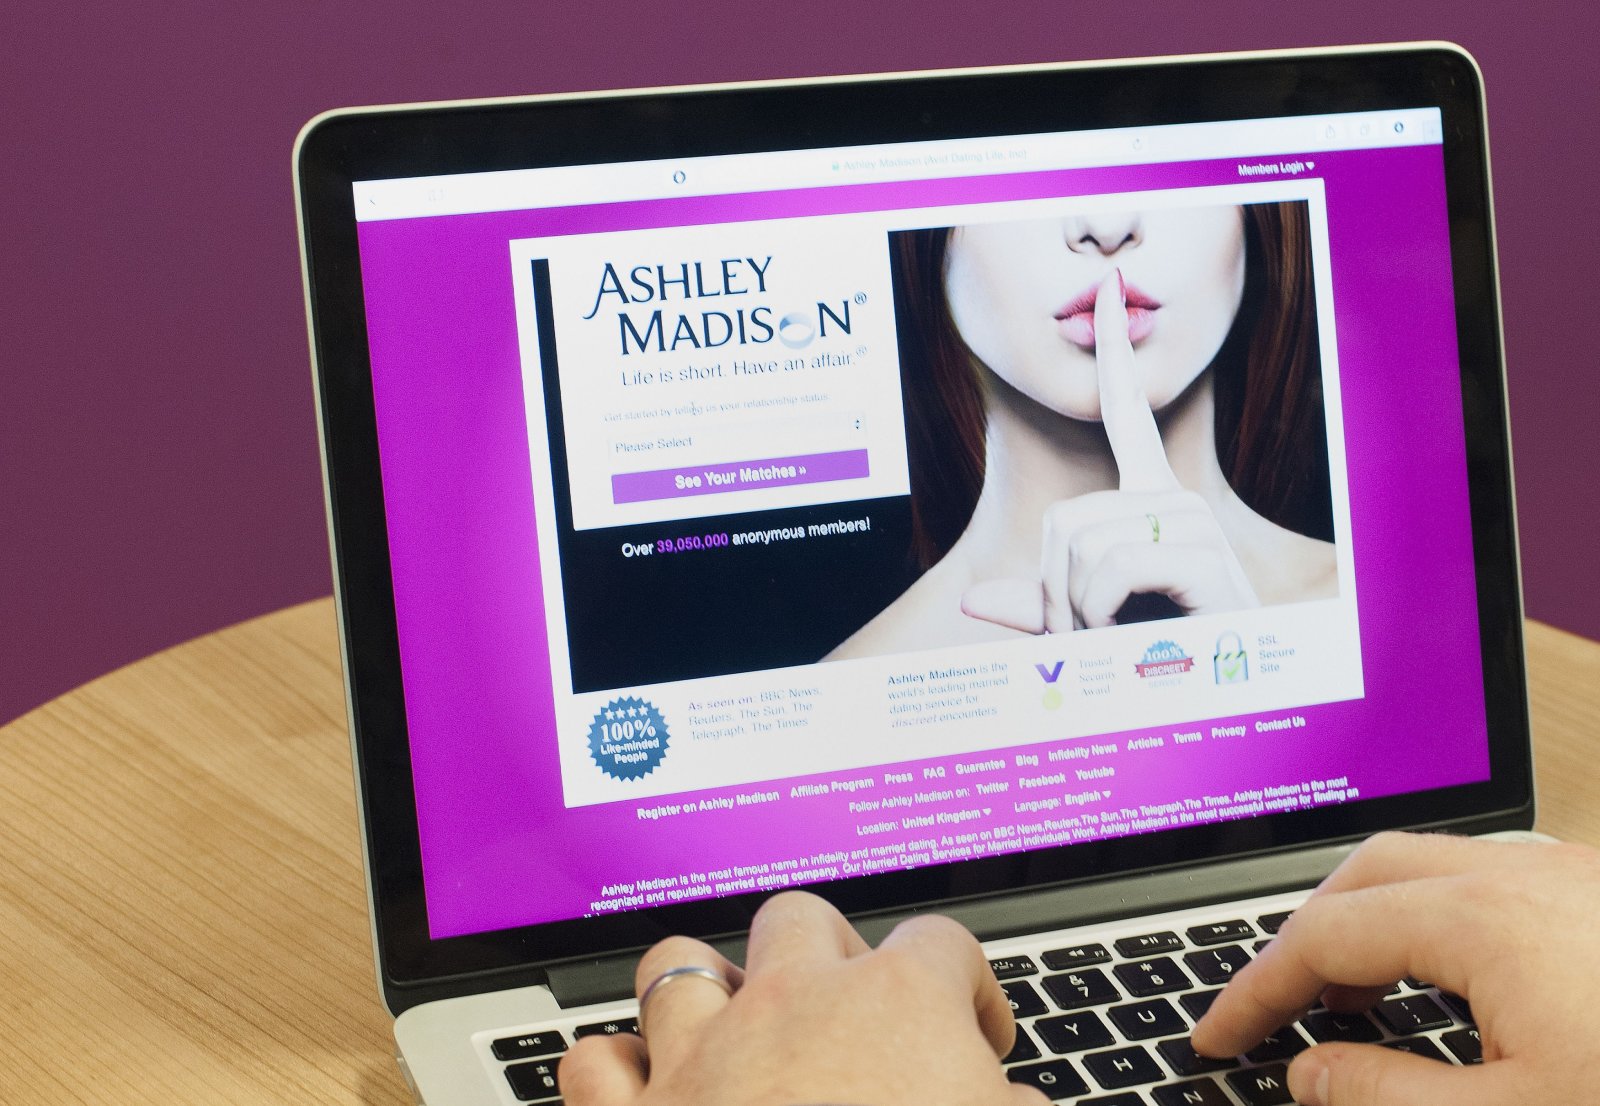 PICTURE POSED BY MODEL A man wearing a wedding ring looks at the Ashley Madison website, as a second wave of personal data alleged to have come from the adultery site has been published online by the site's hackers.